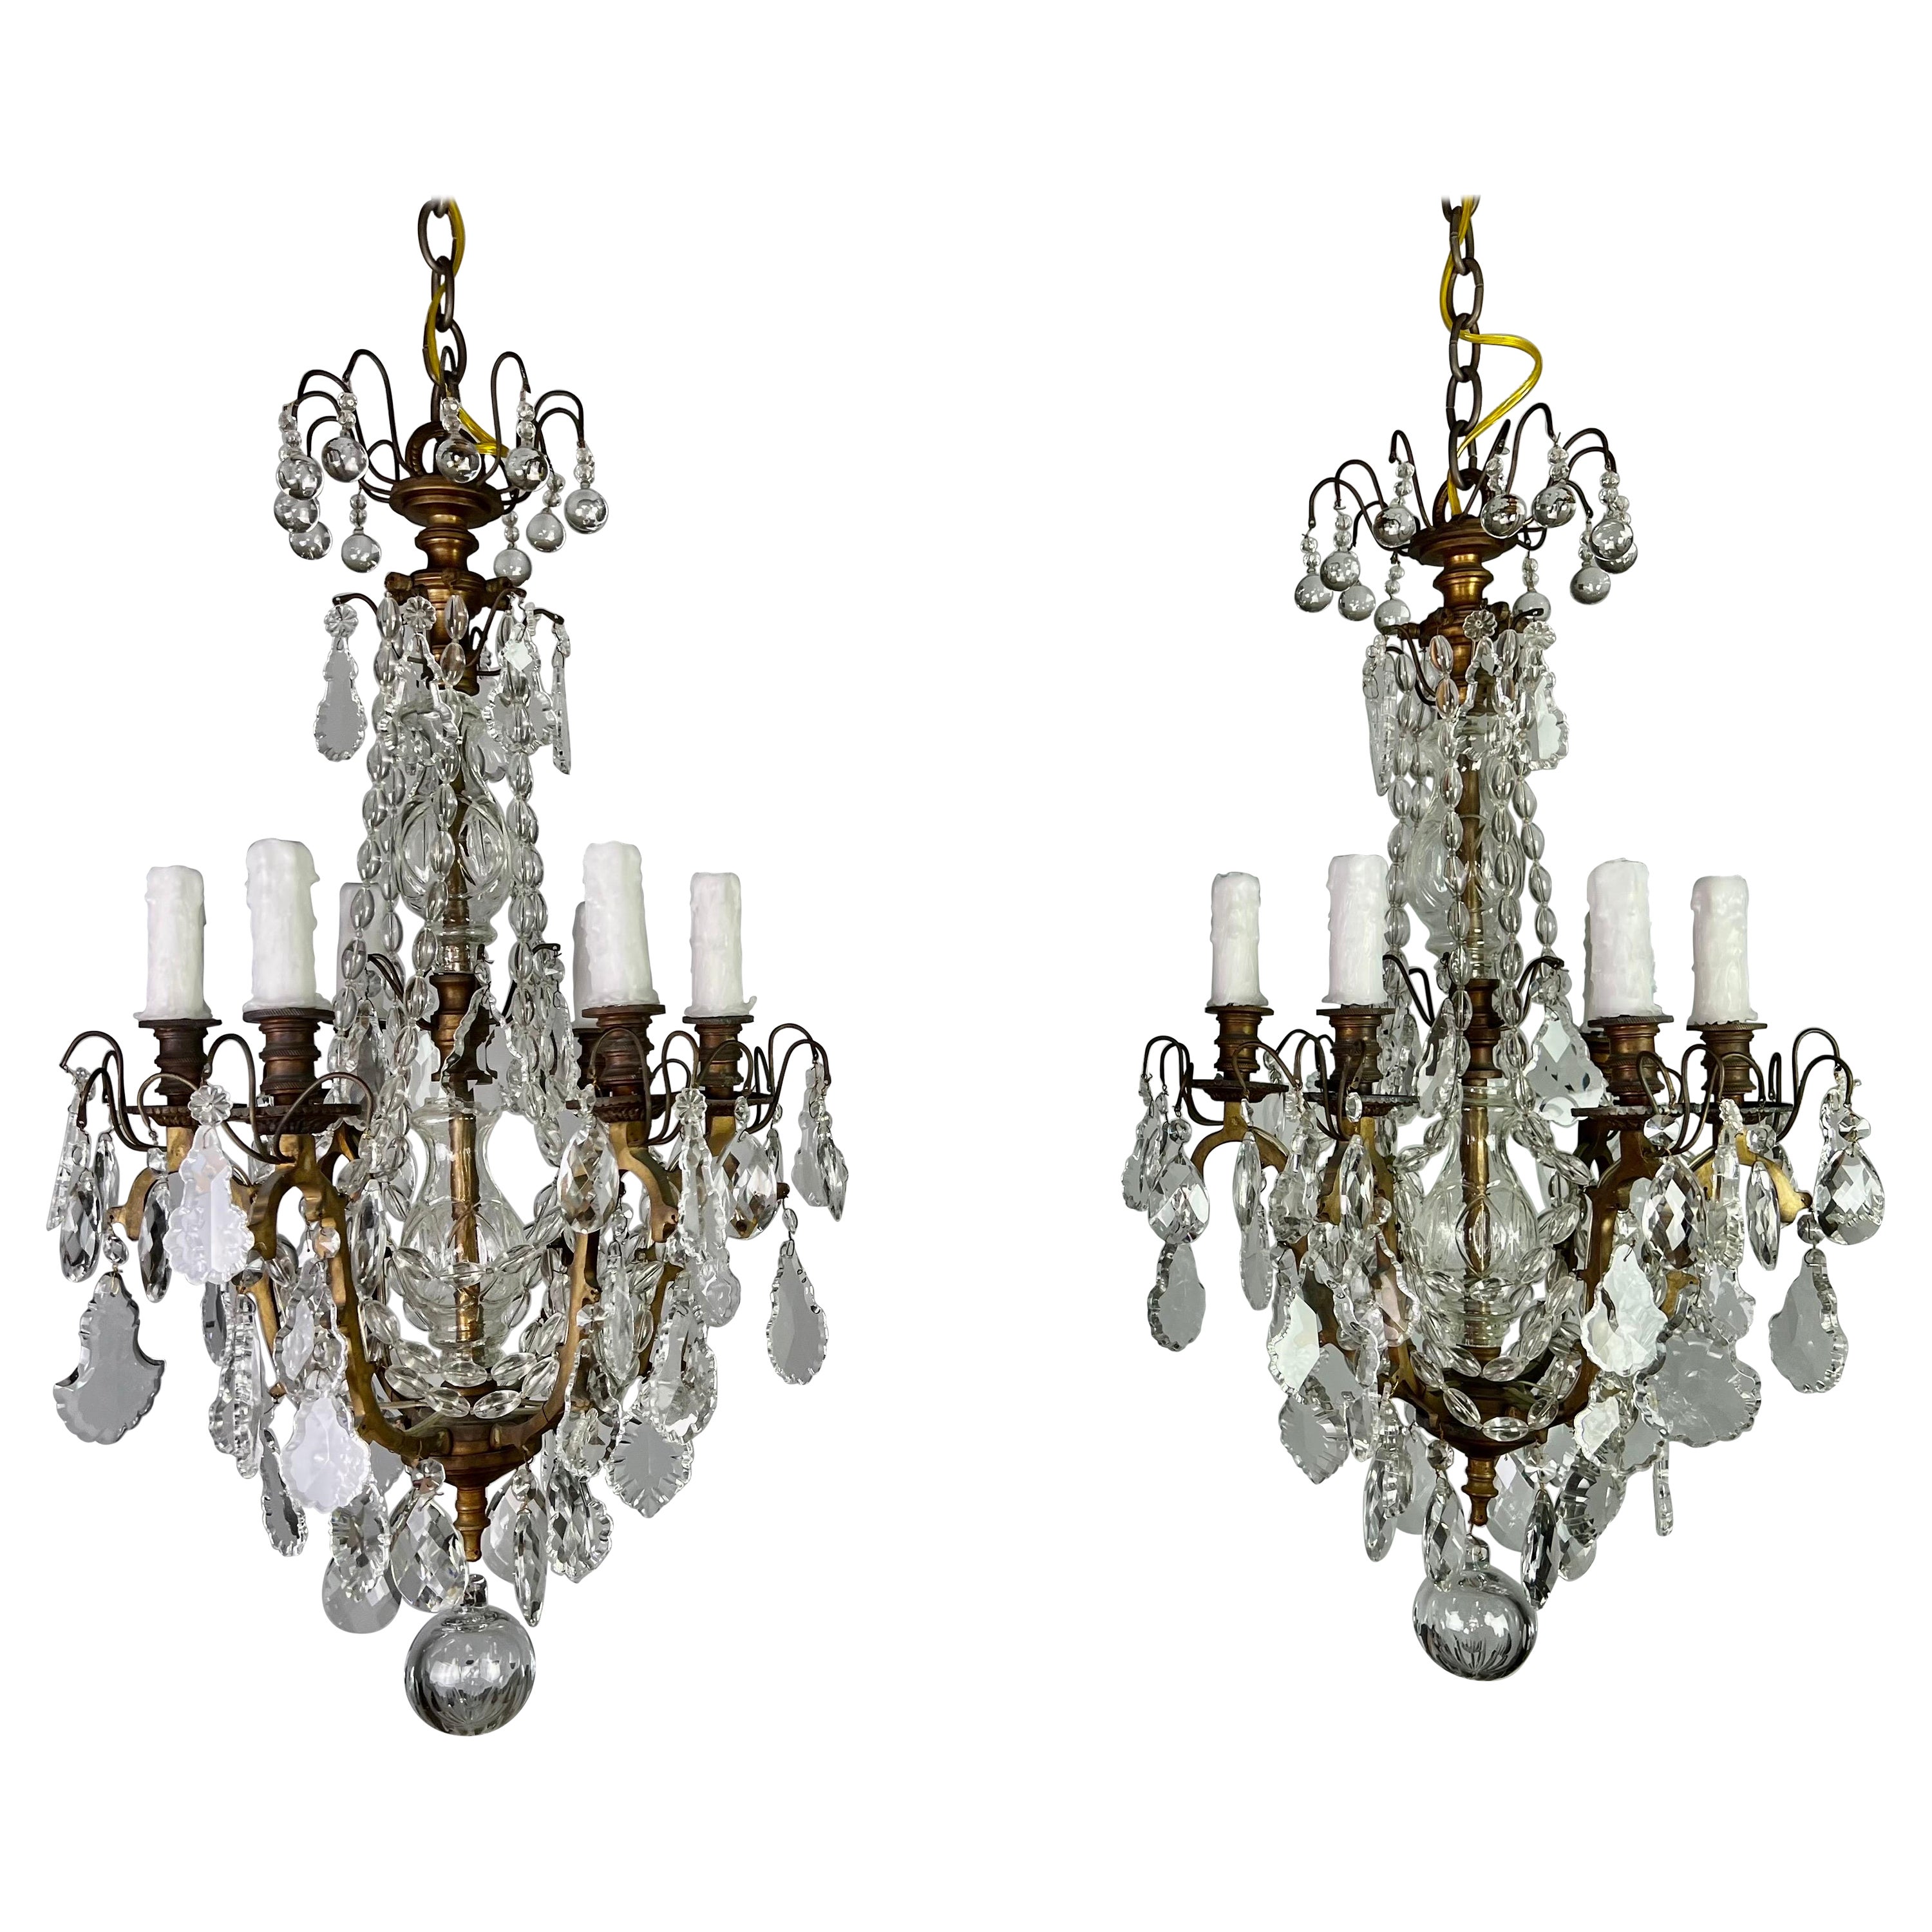 Pair of 19th C .French Crystal Chandeliers